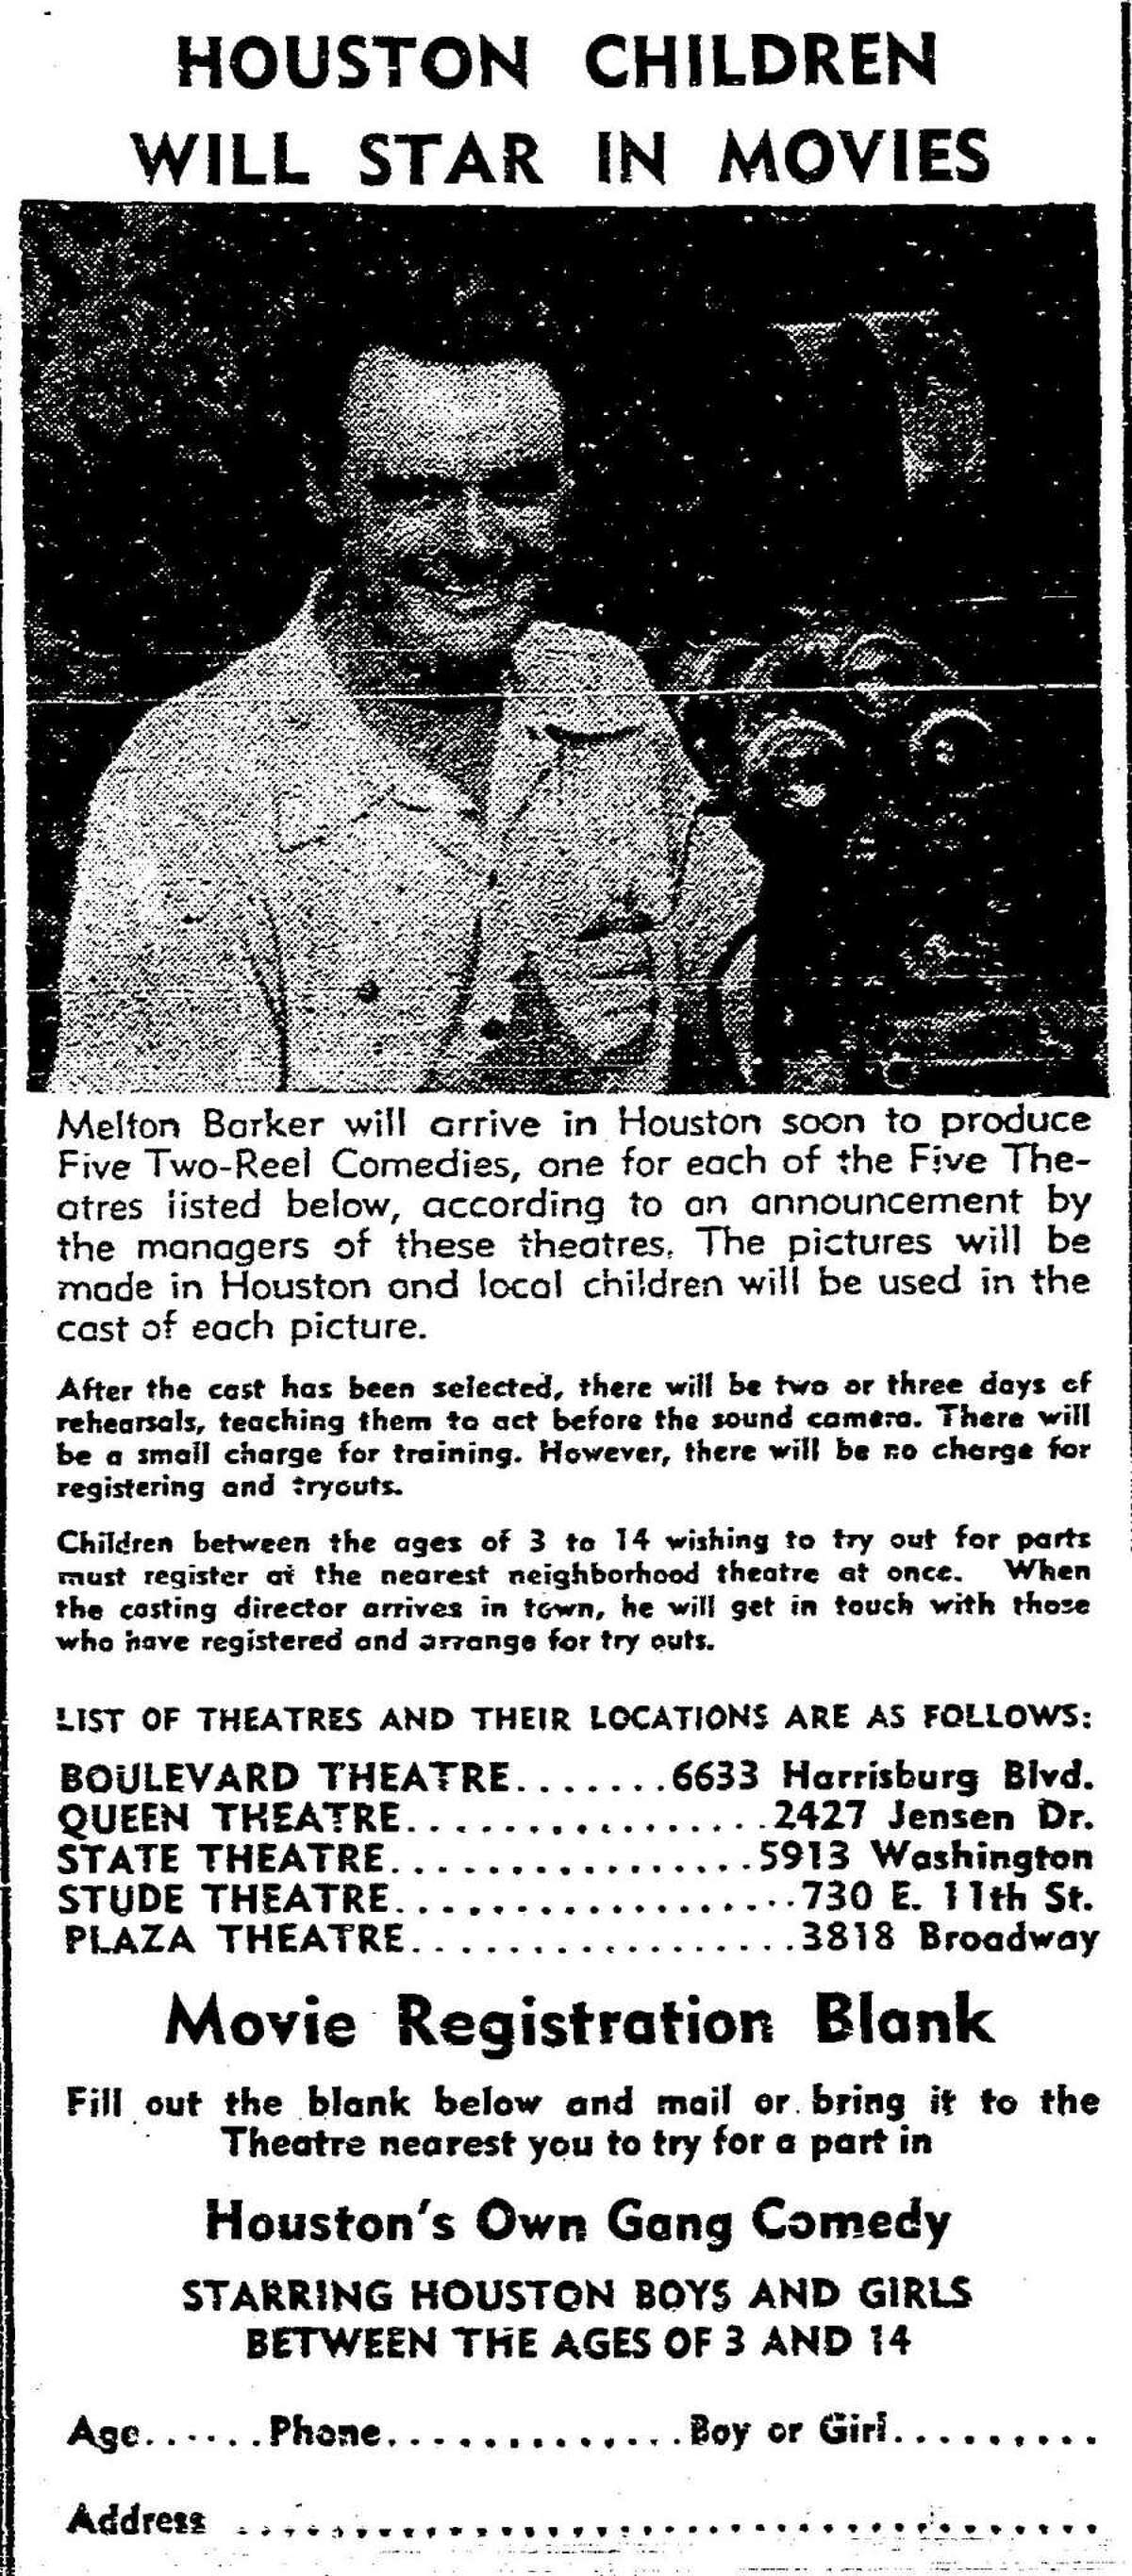 A 1948 newspaper ad in the Houston Chronicle promotes local auditions for Melton Barker's "Kidnappers Foil".